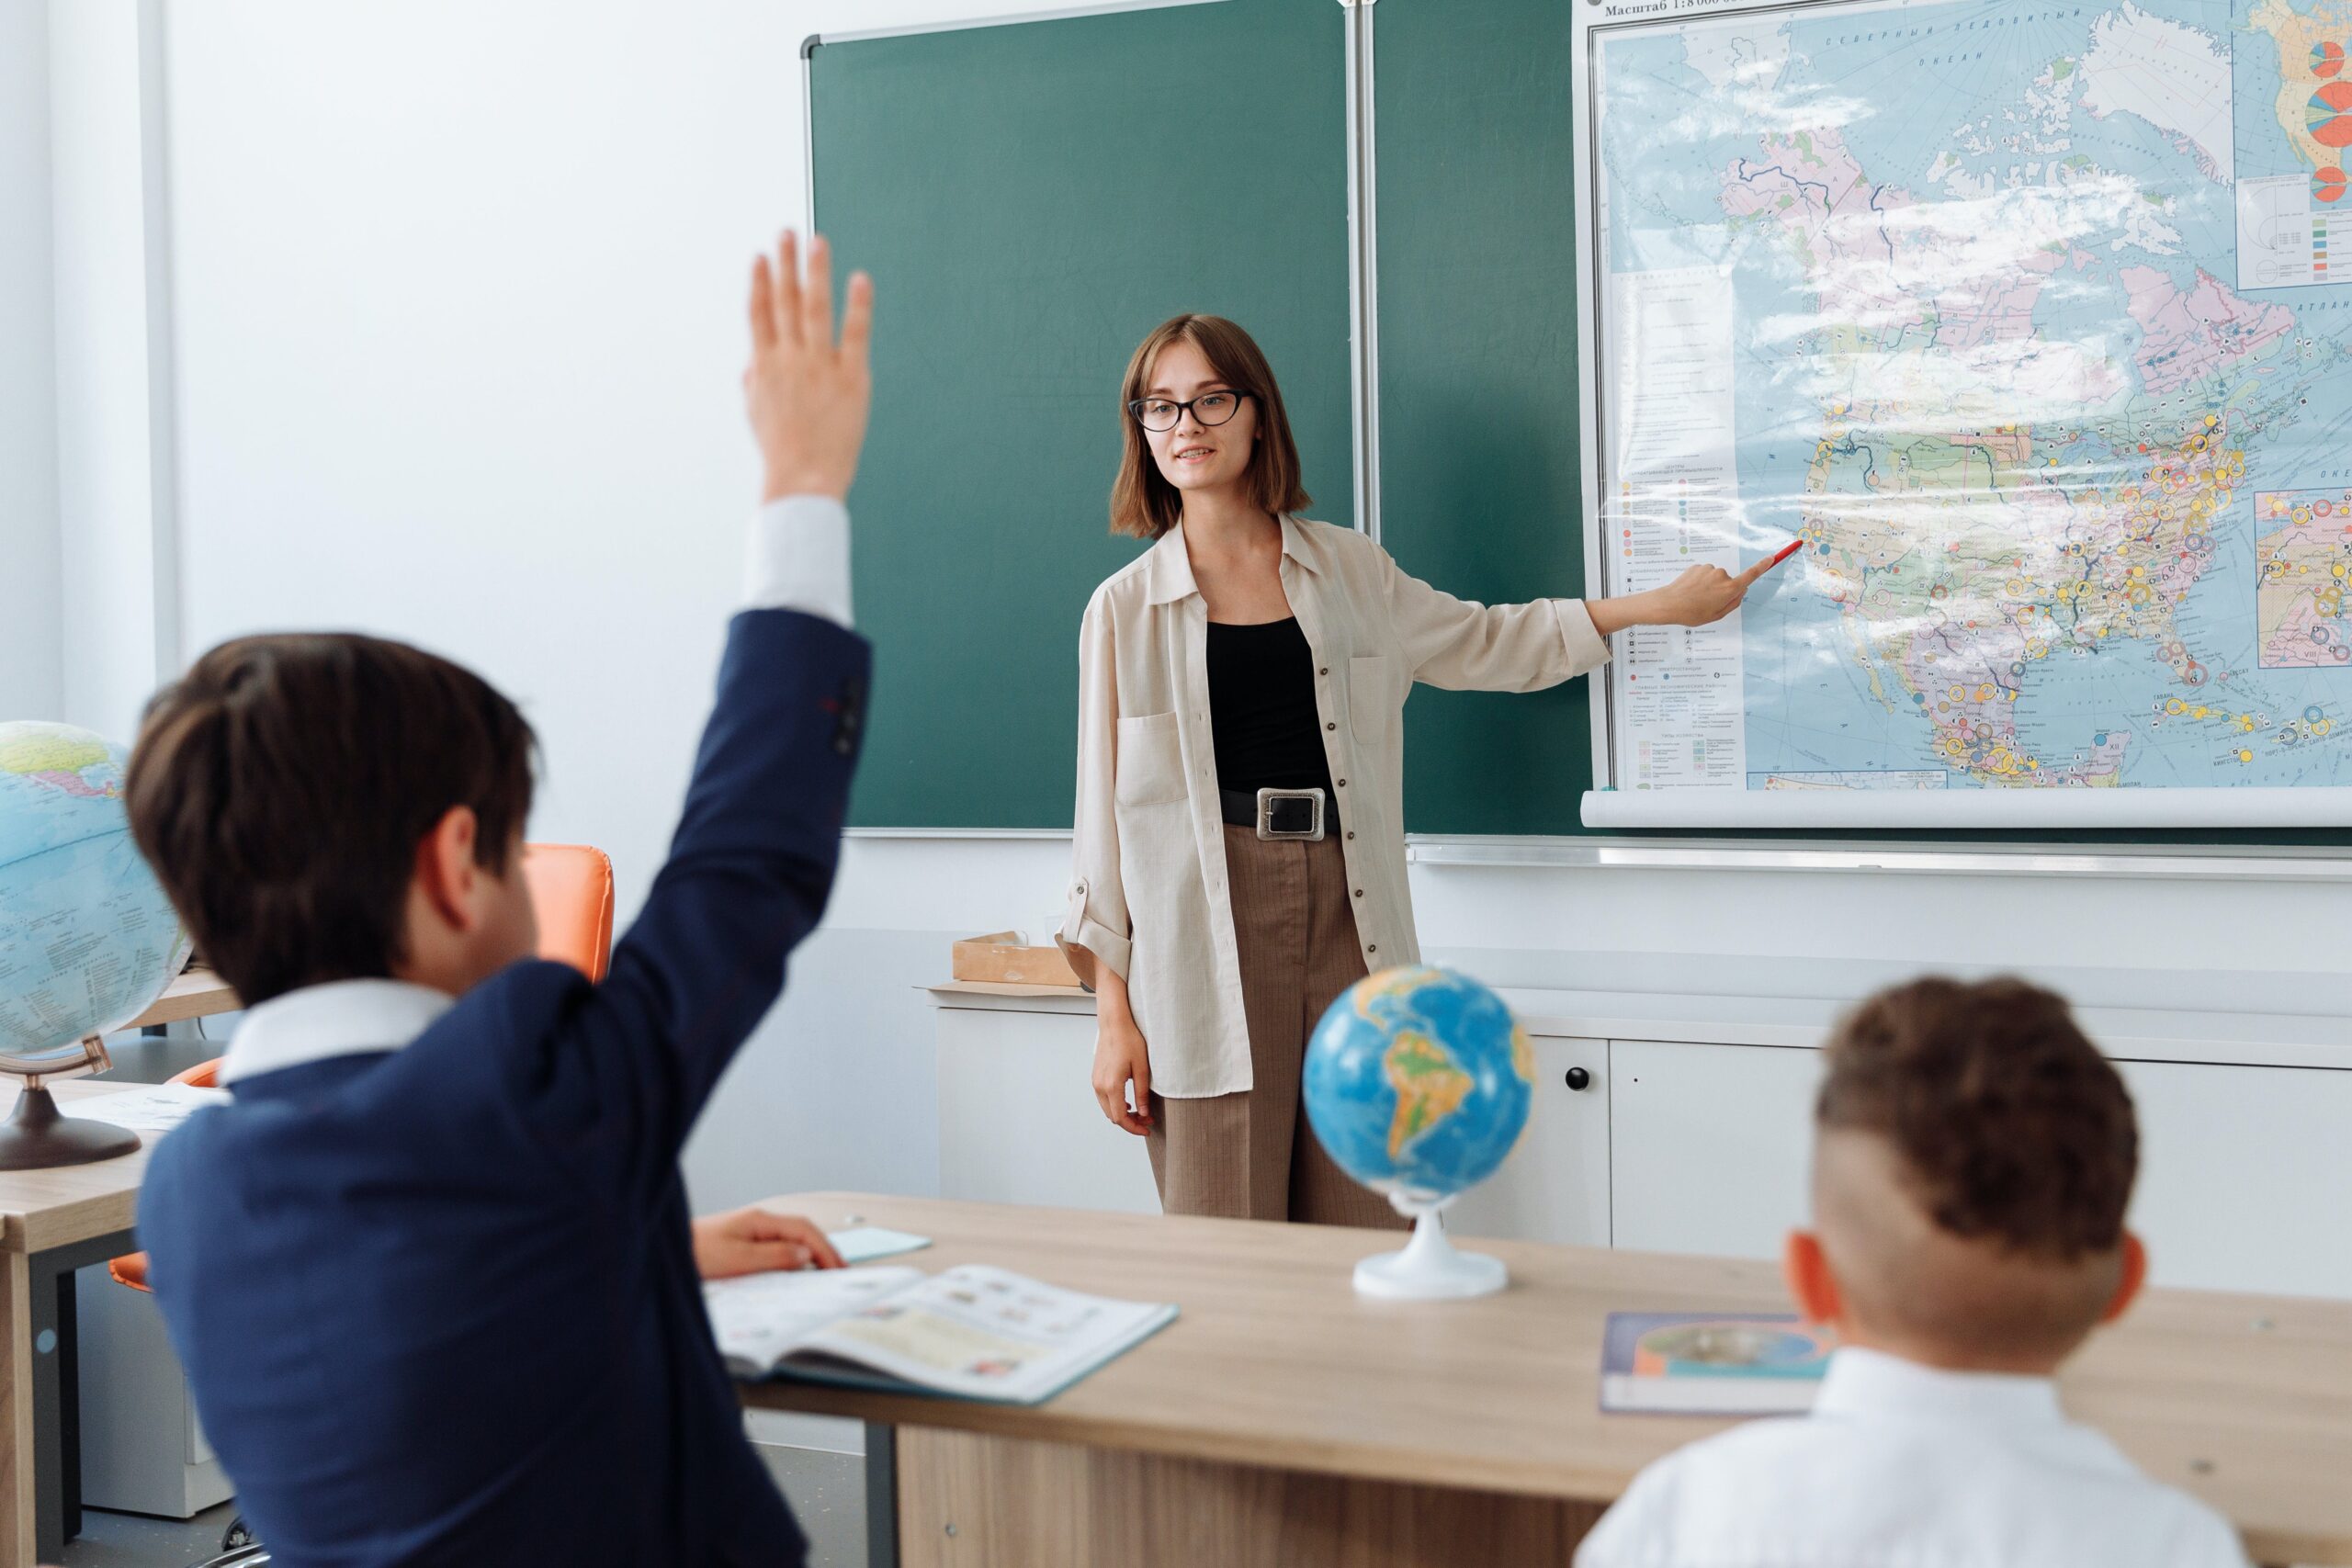 https://www.pexels.com/photo/teacher-discussing-her-lesson-about-geography-8926556/